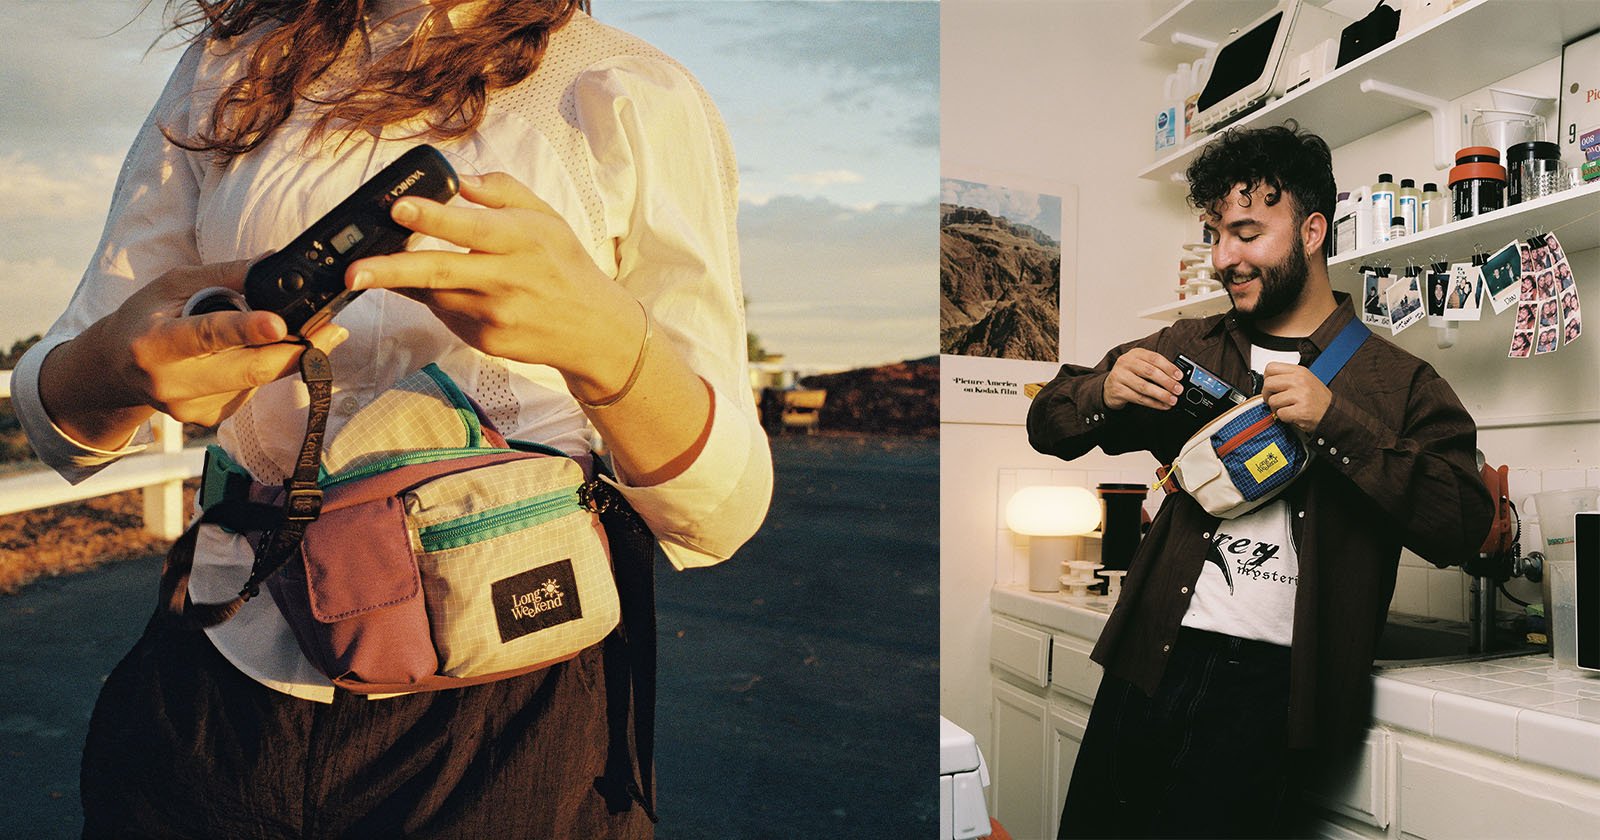 Moment’s Latest ‘Long Weekend’ Bags Support the Casual Photographer